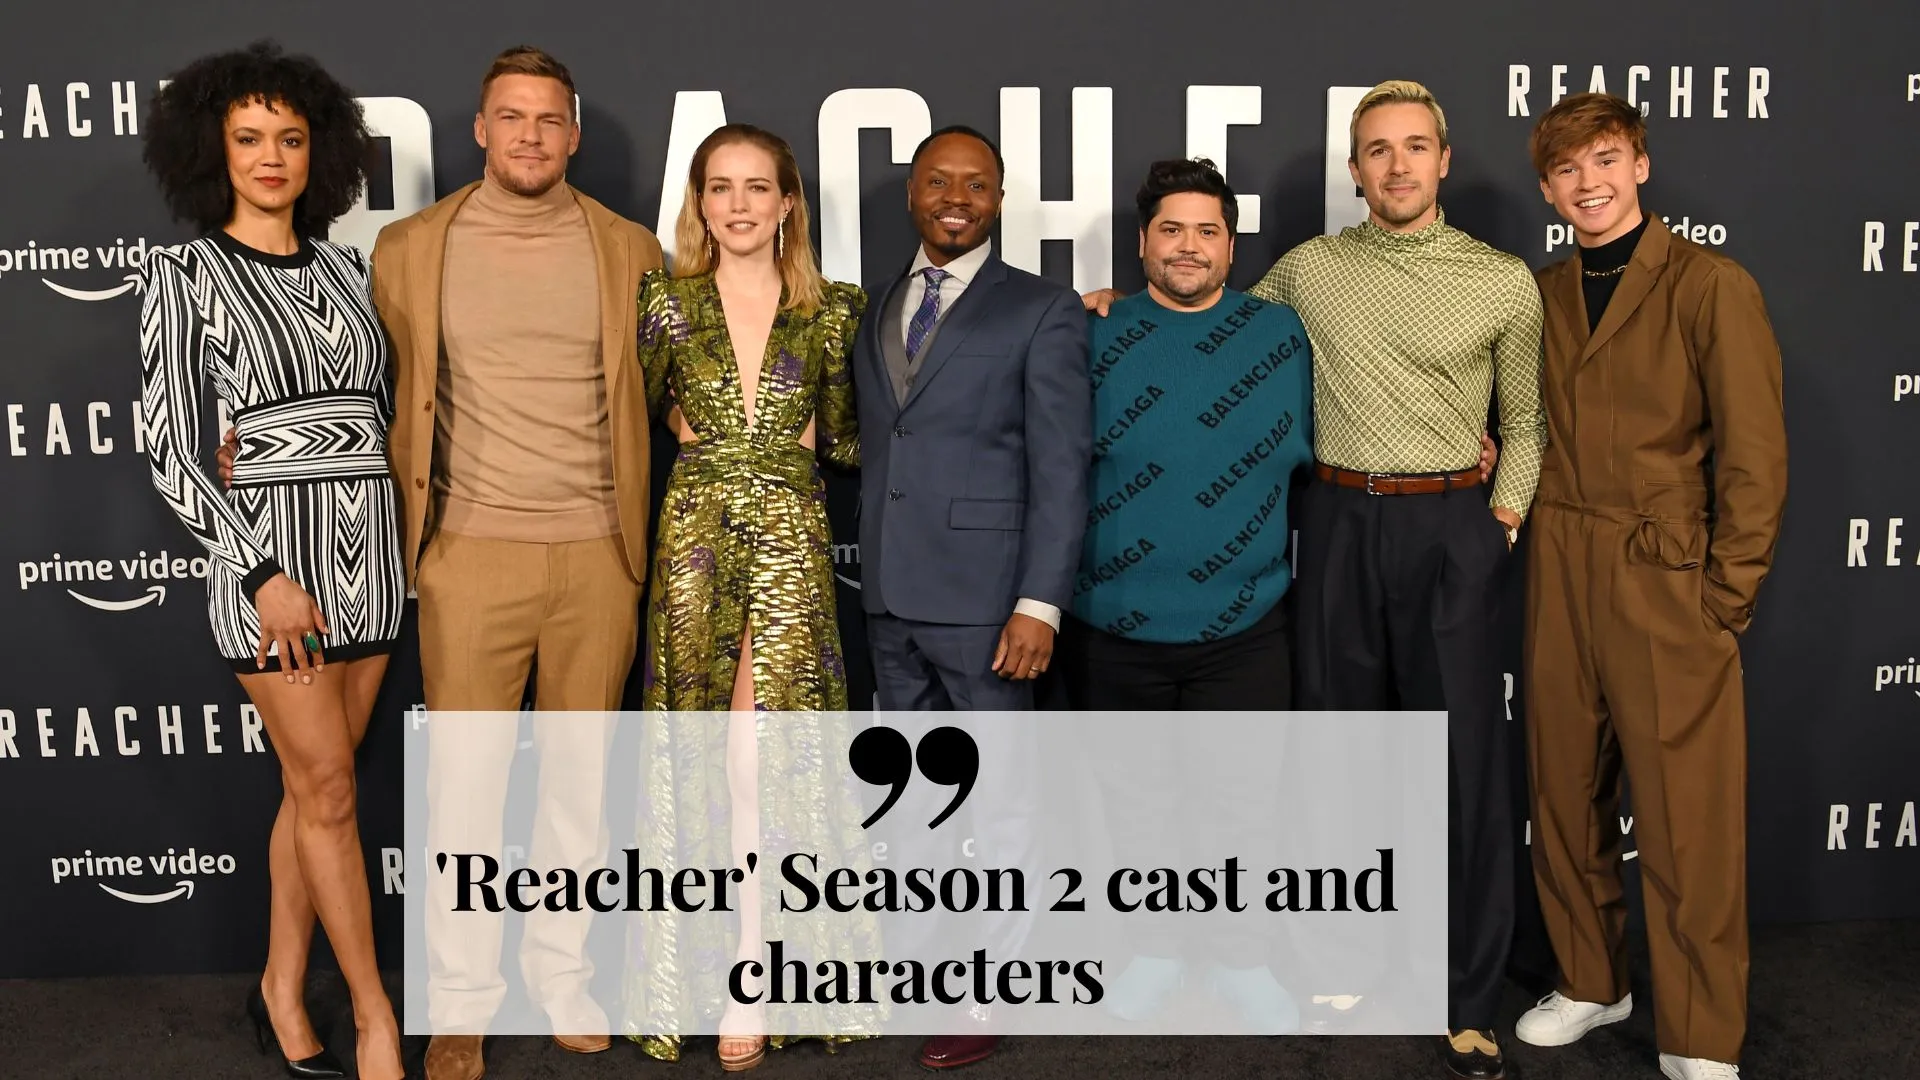 'Reacher' Season 2 cast and characters (Image credit: Dailymail)